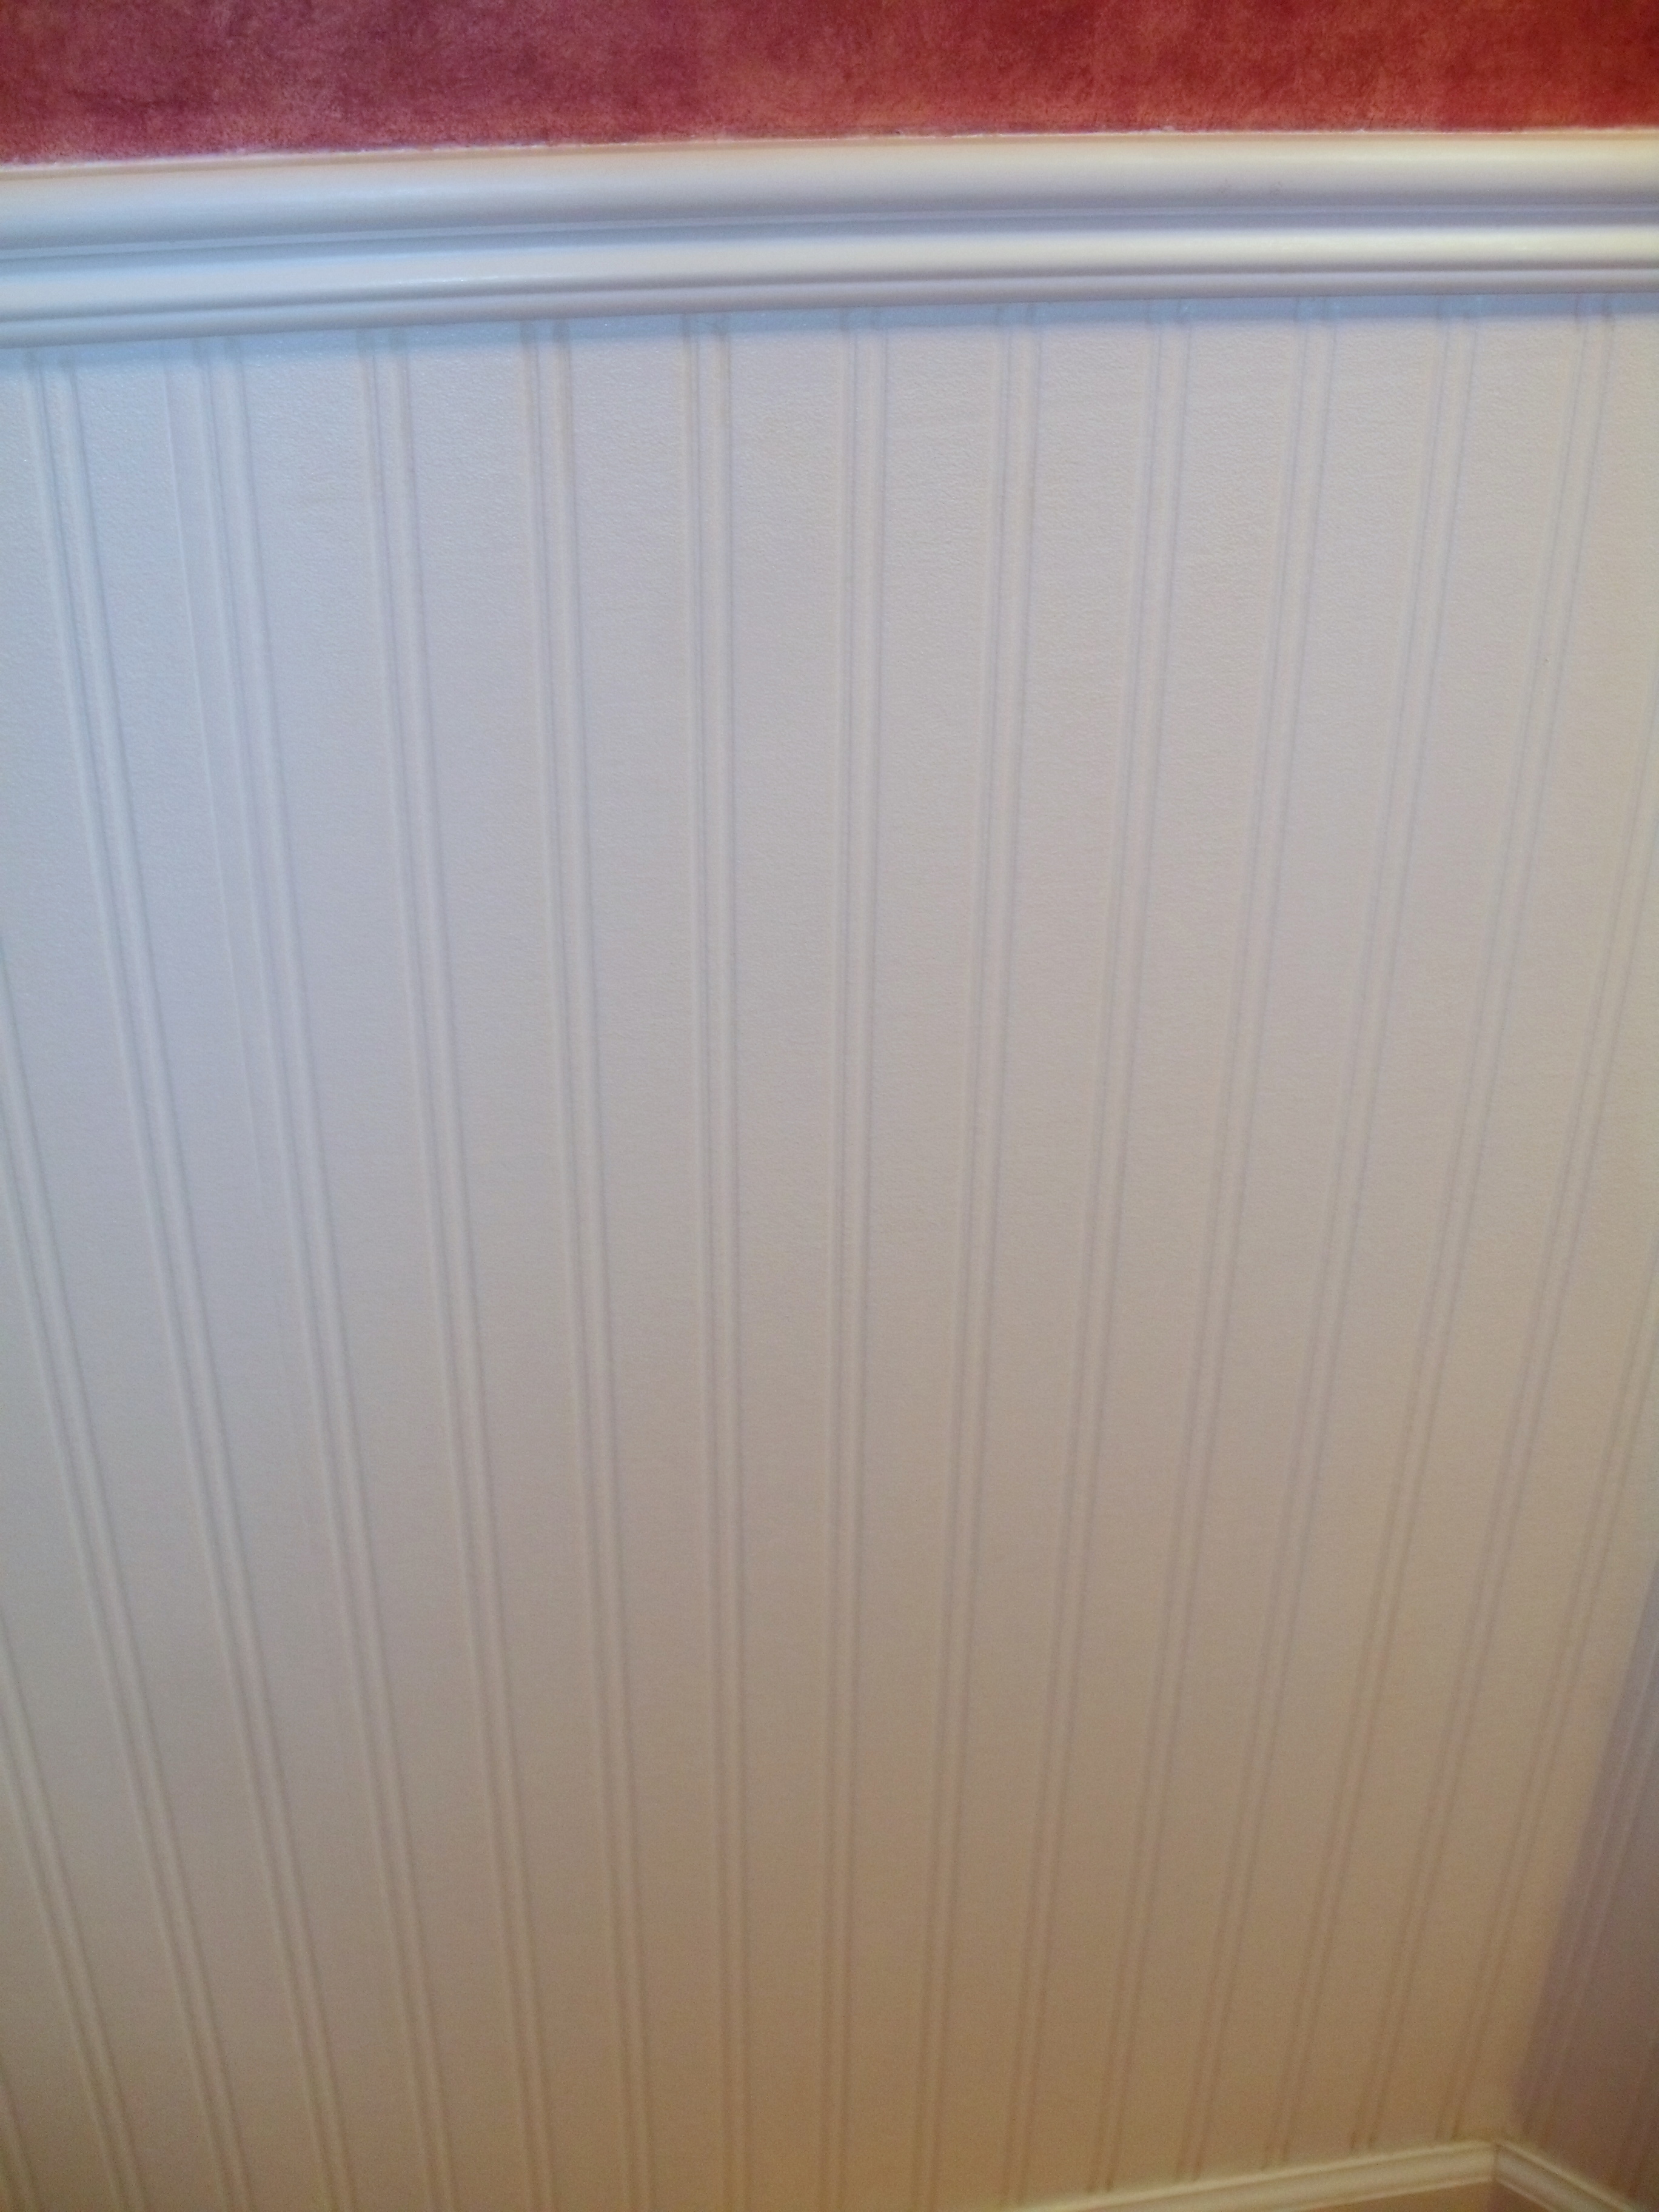 Beadboard Wallpaper Is Really Awesome But I Got Tired Of It